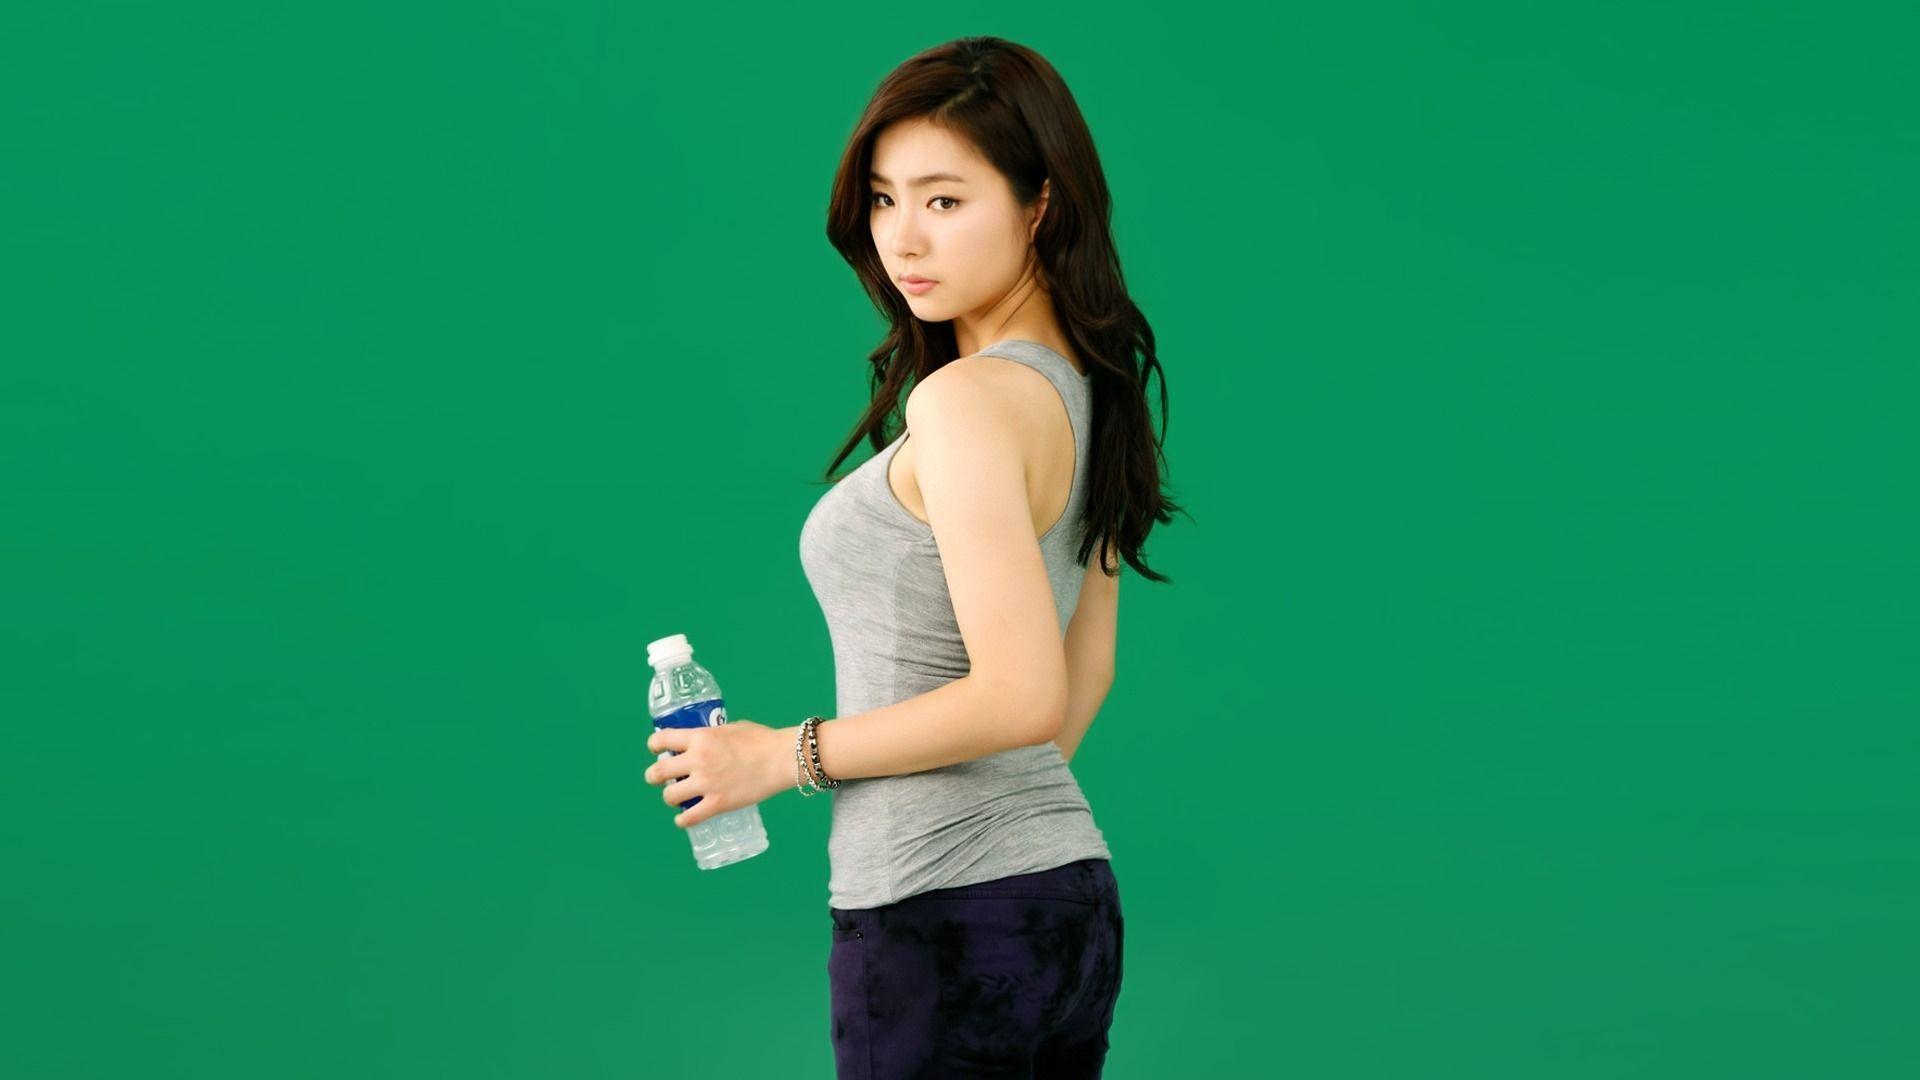 Shin Se Kyung Wallpapers High Resolution and Quality Download